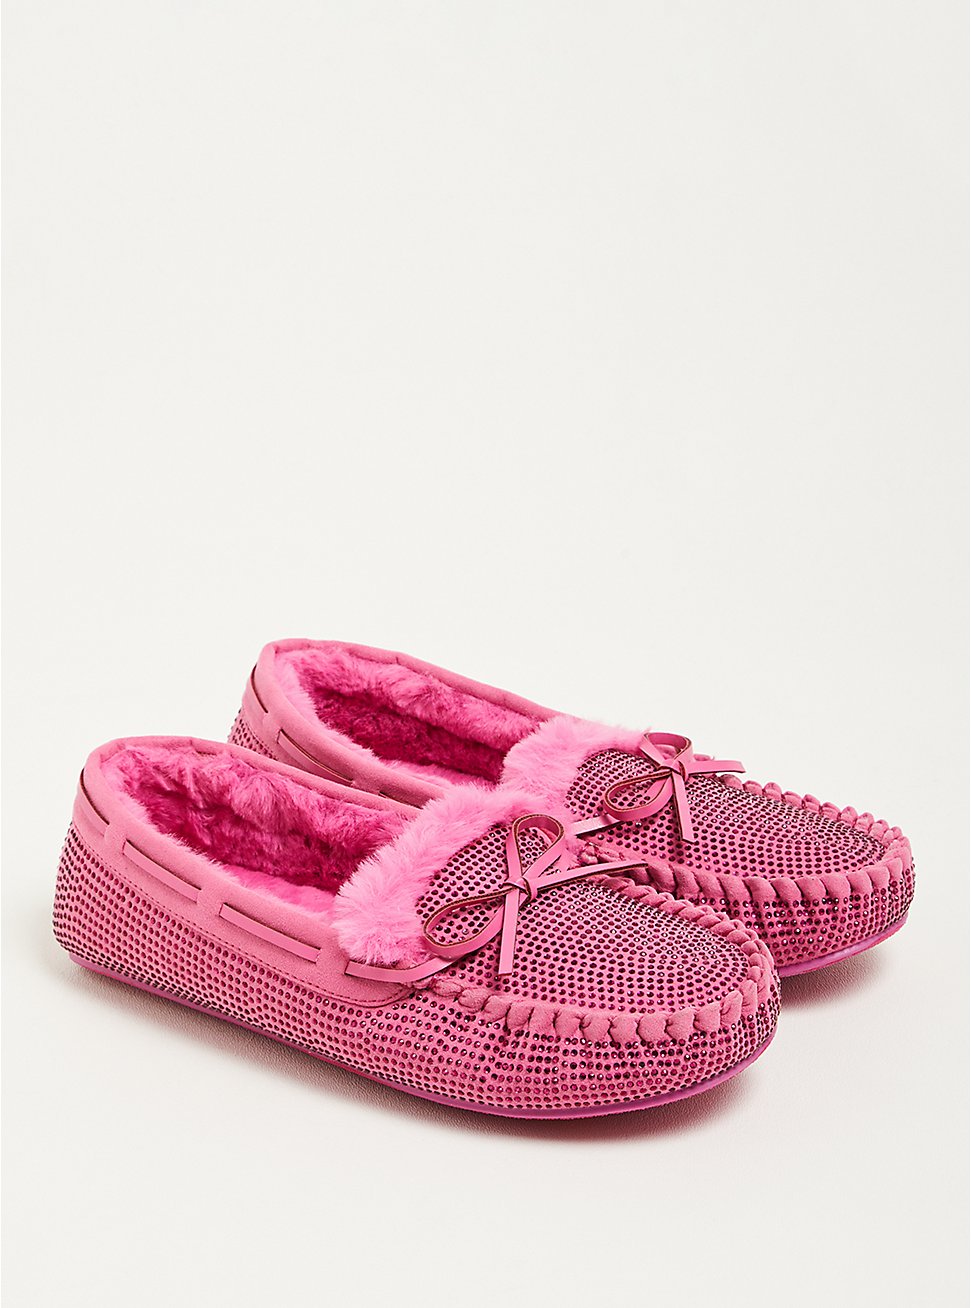 Plus Size Studded Slipper - Faux Suede Pink (WW), PINK, hi-res